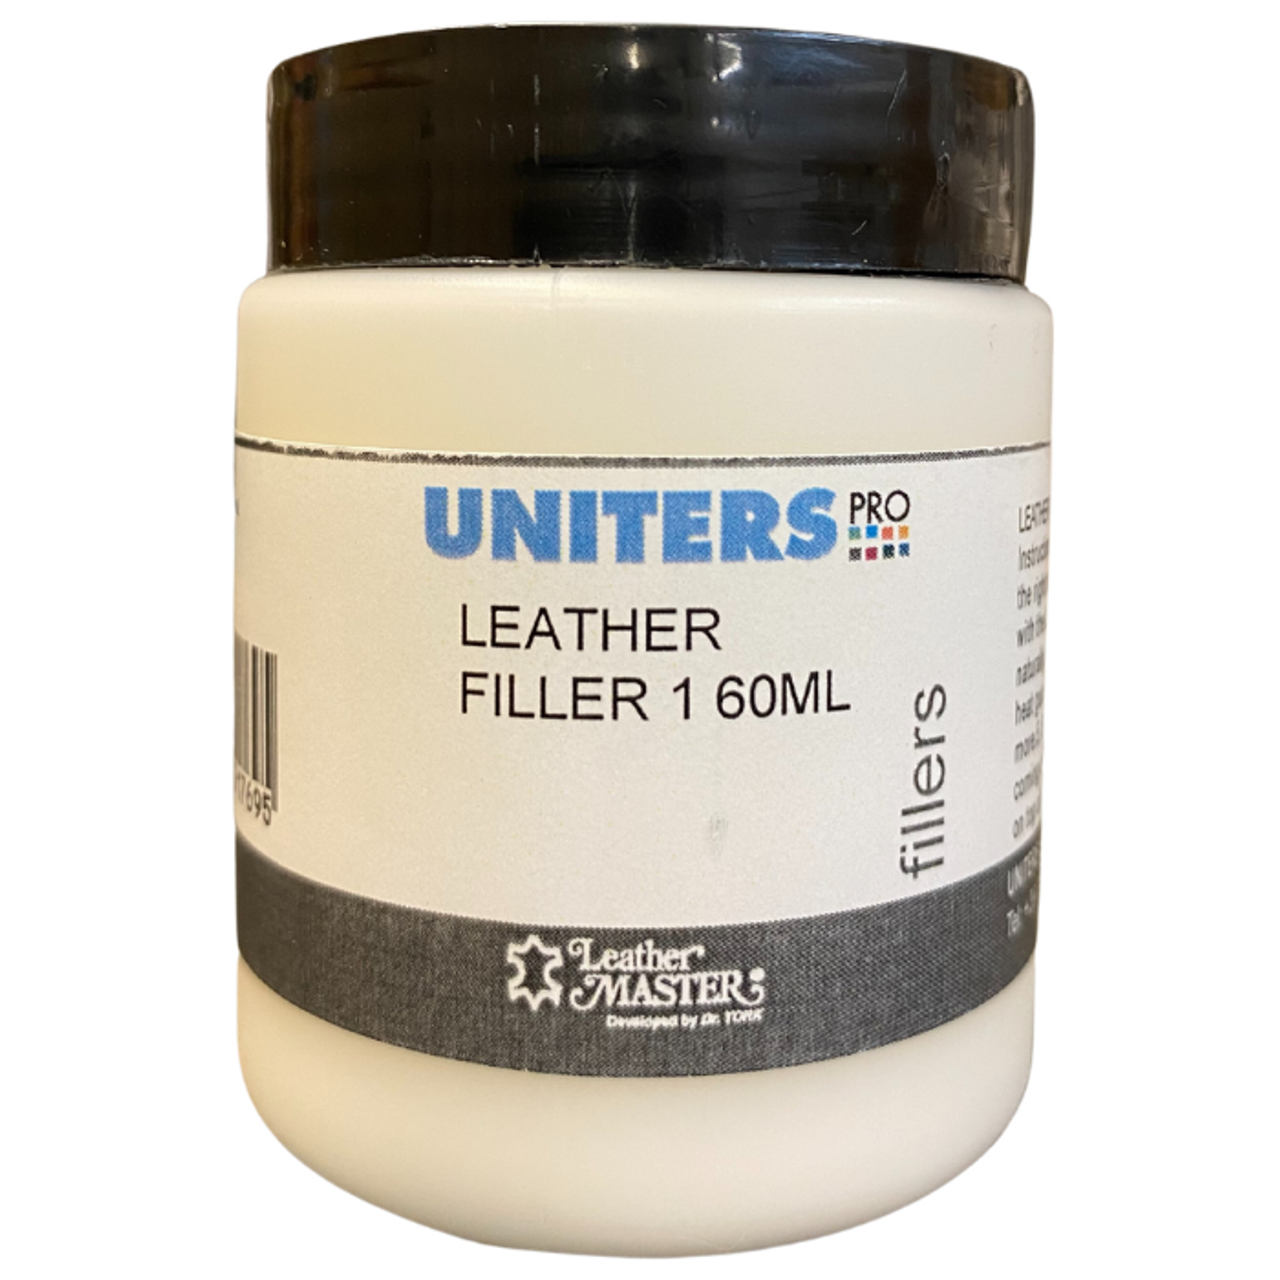 Leather Filler Paste  Buffalo Trade Products for Leather